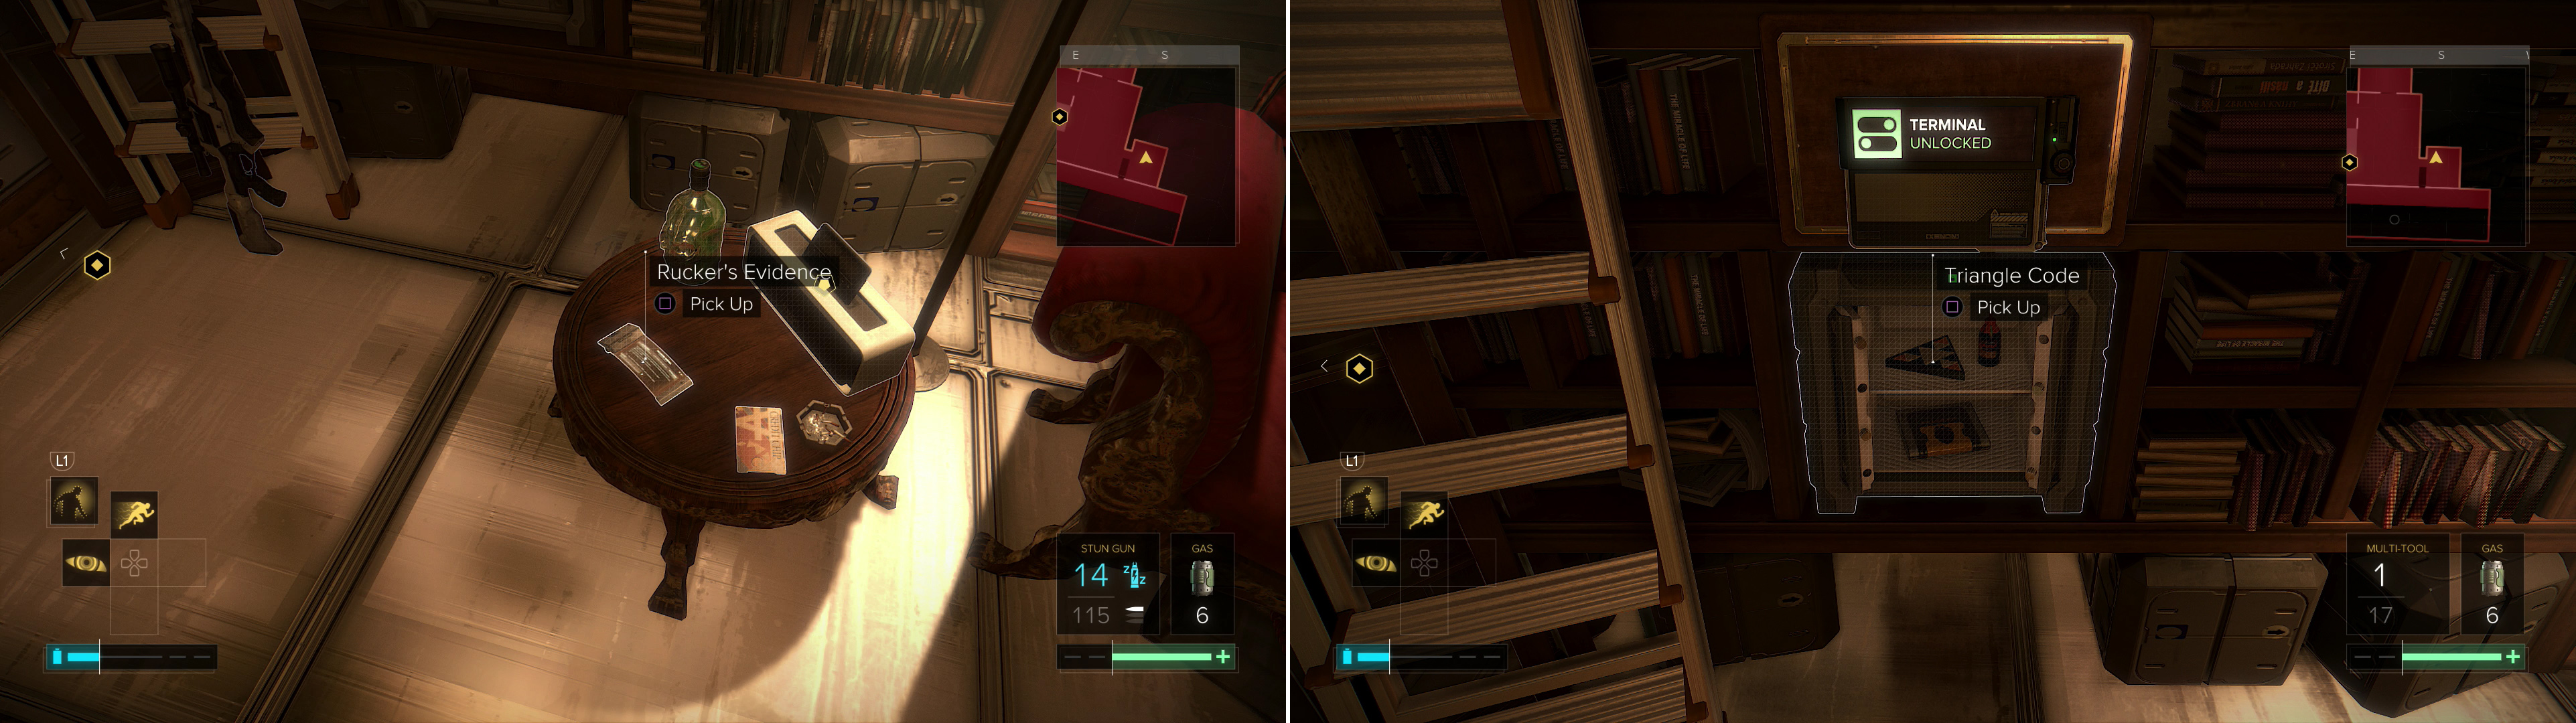 Pick up Rucker's Evidence (left), then loot his safe to find a variety of goodies (right).